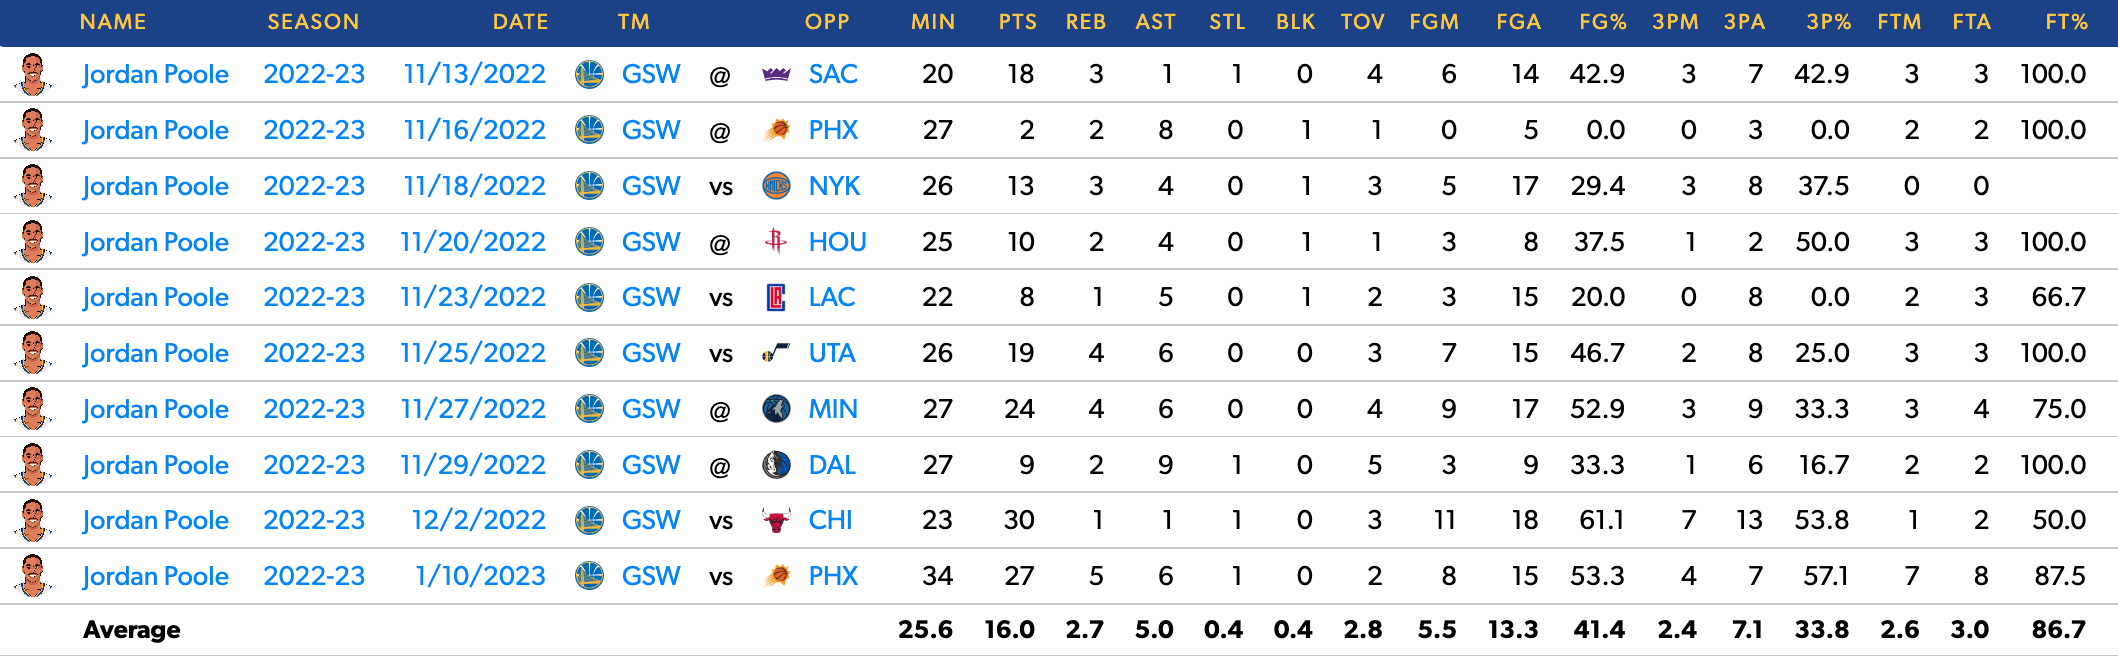 Poole's last 10 games with Curry, Thompson, and Wiggins.